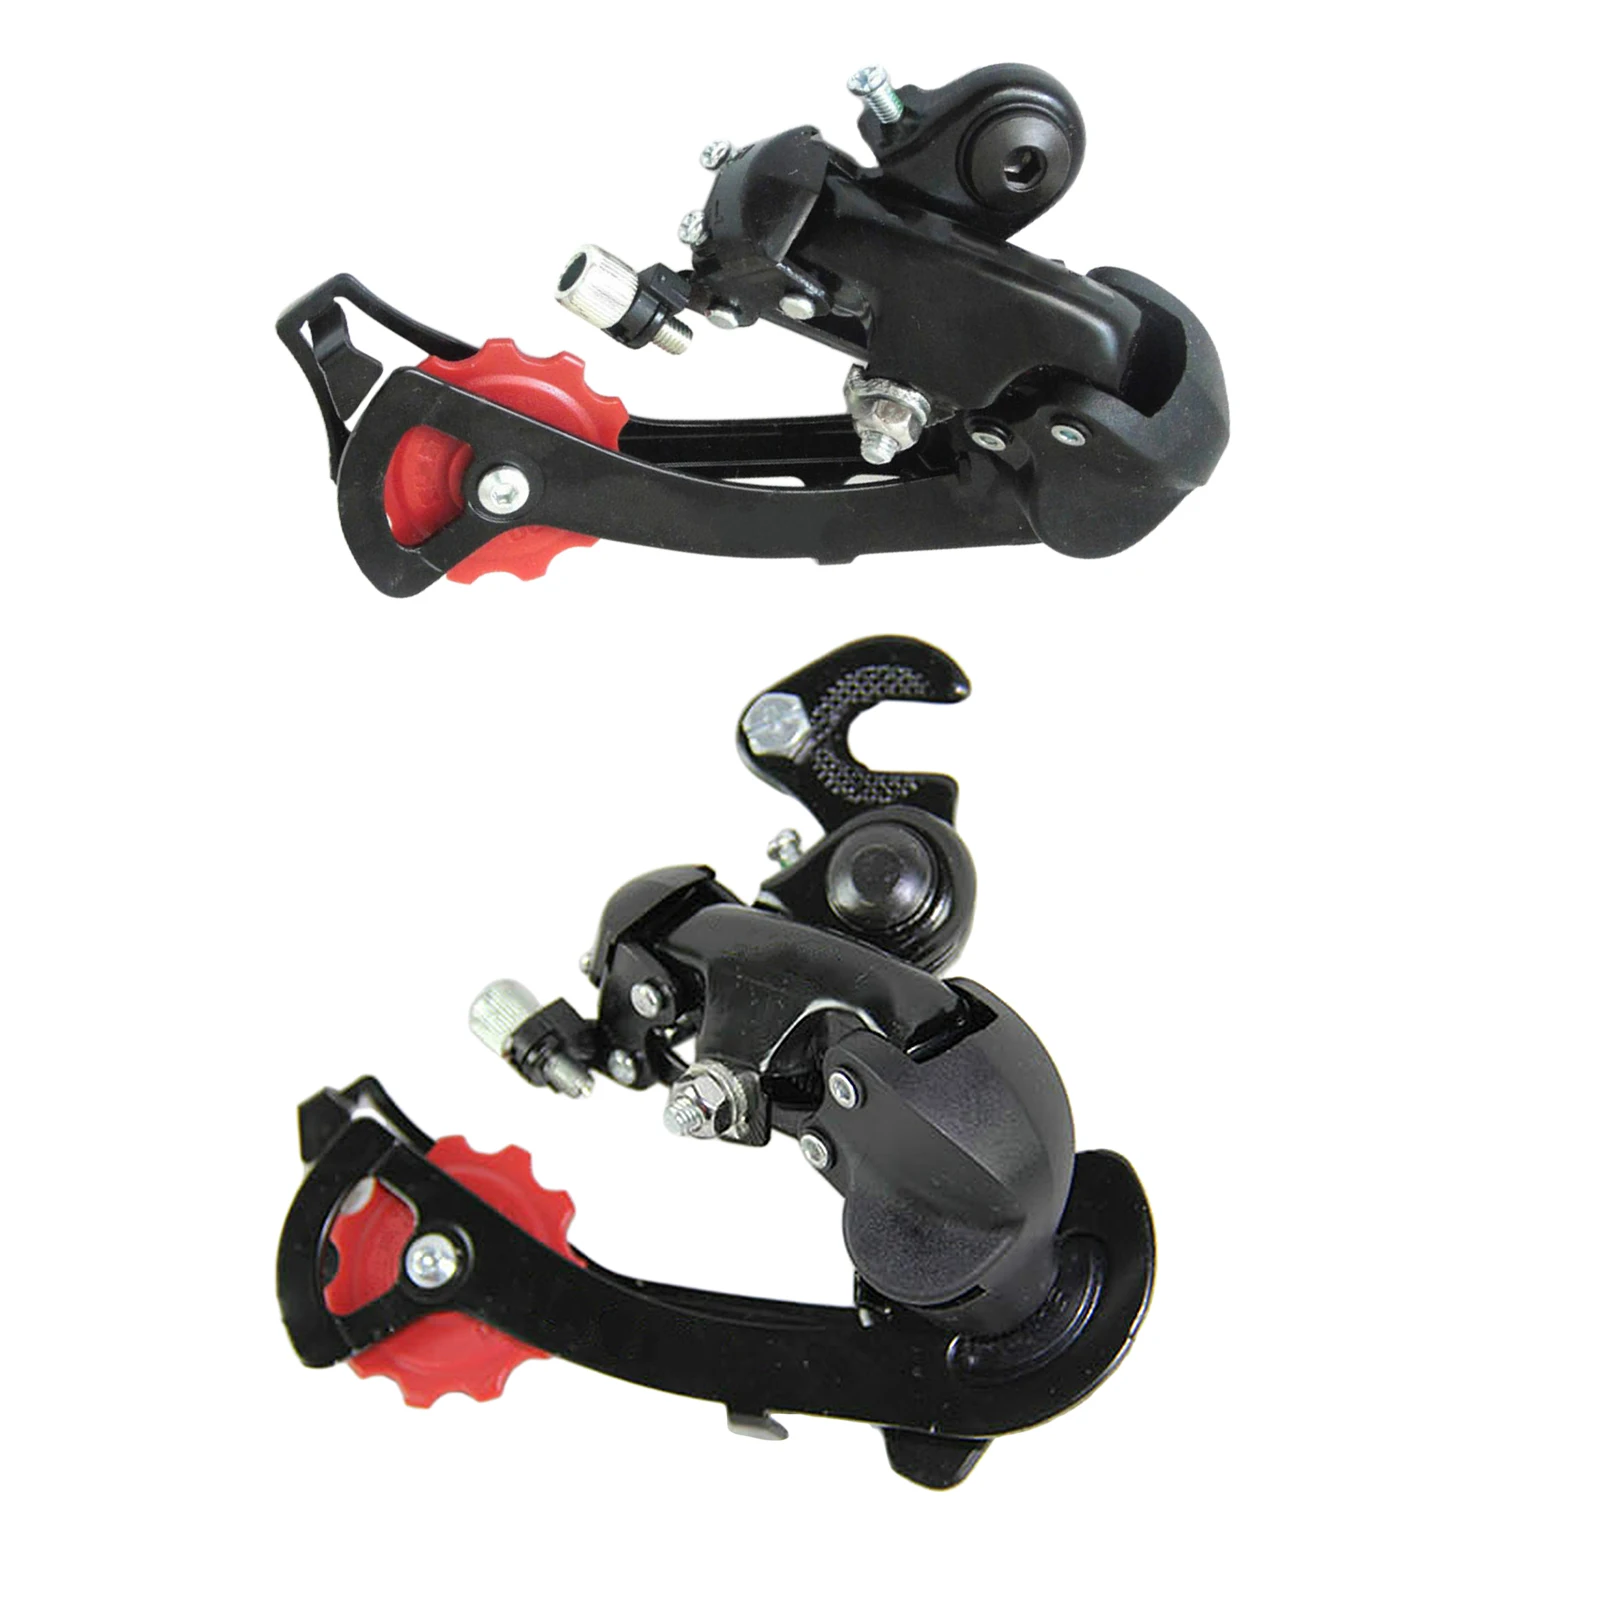 Bike Rear Derailleur RD-TZ50 6/7 Speed Sis Index Direct Mount for Mountain Bicycle, Eye Pull/ Hook Pull